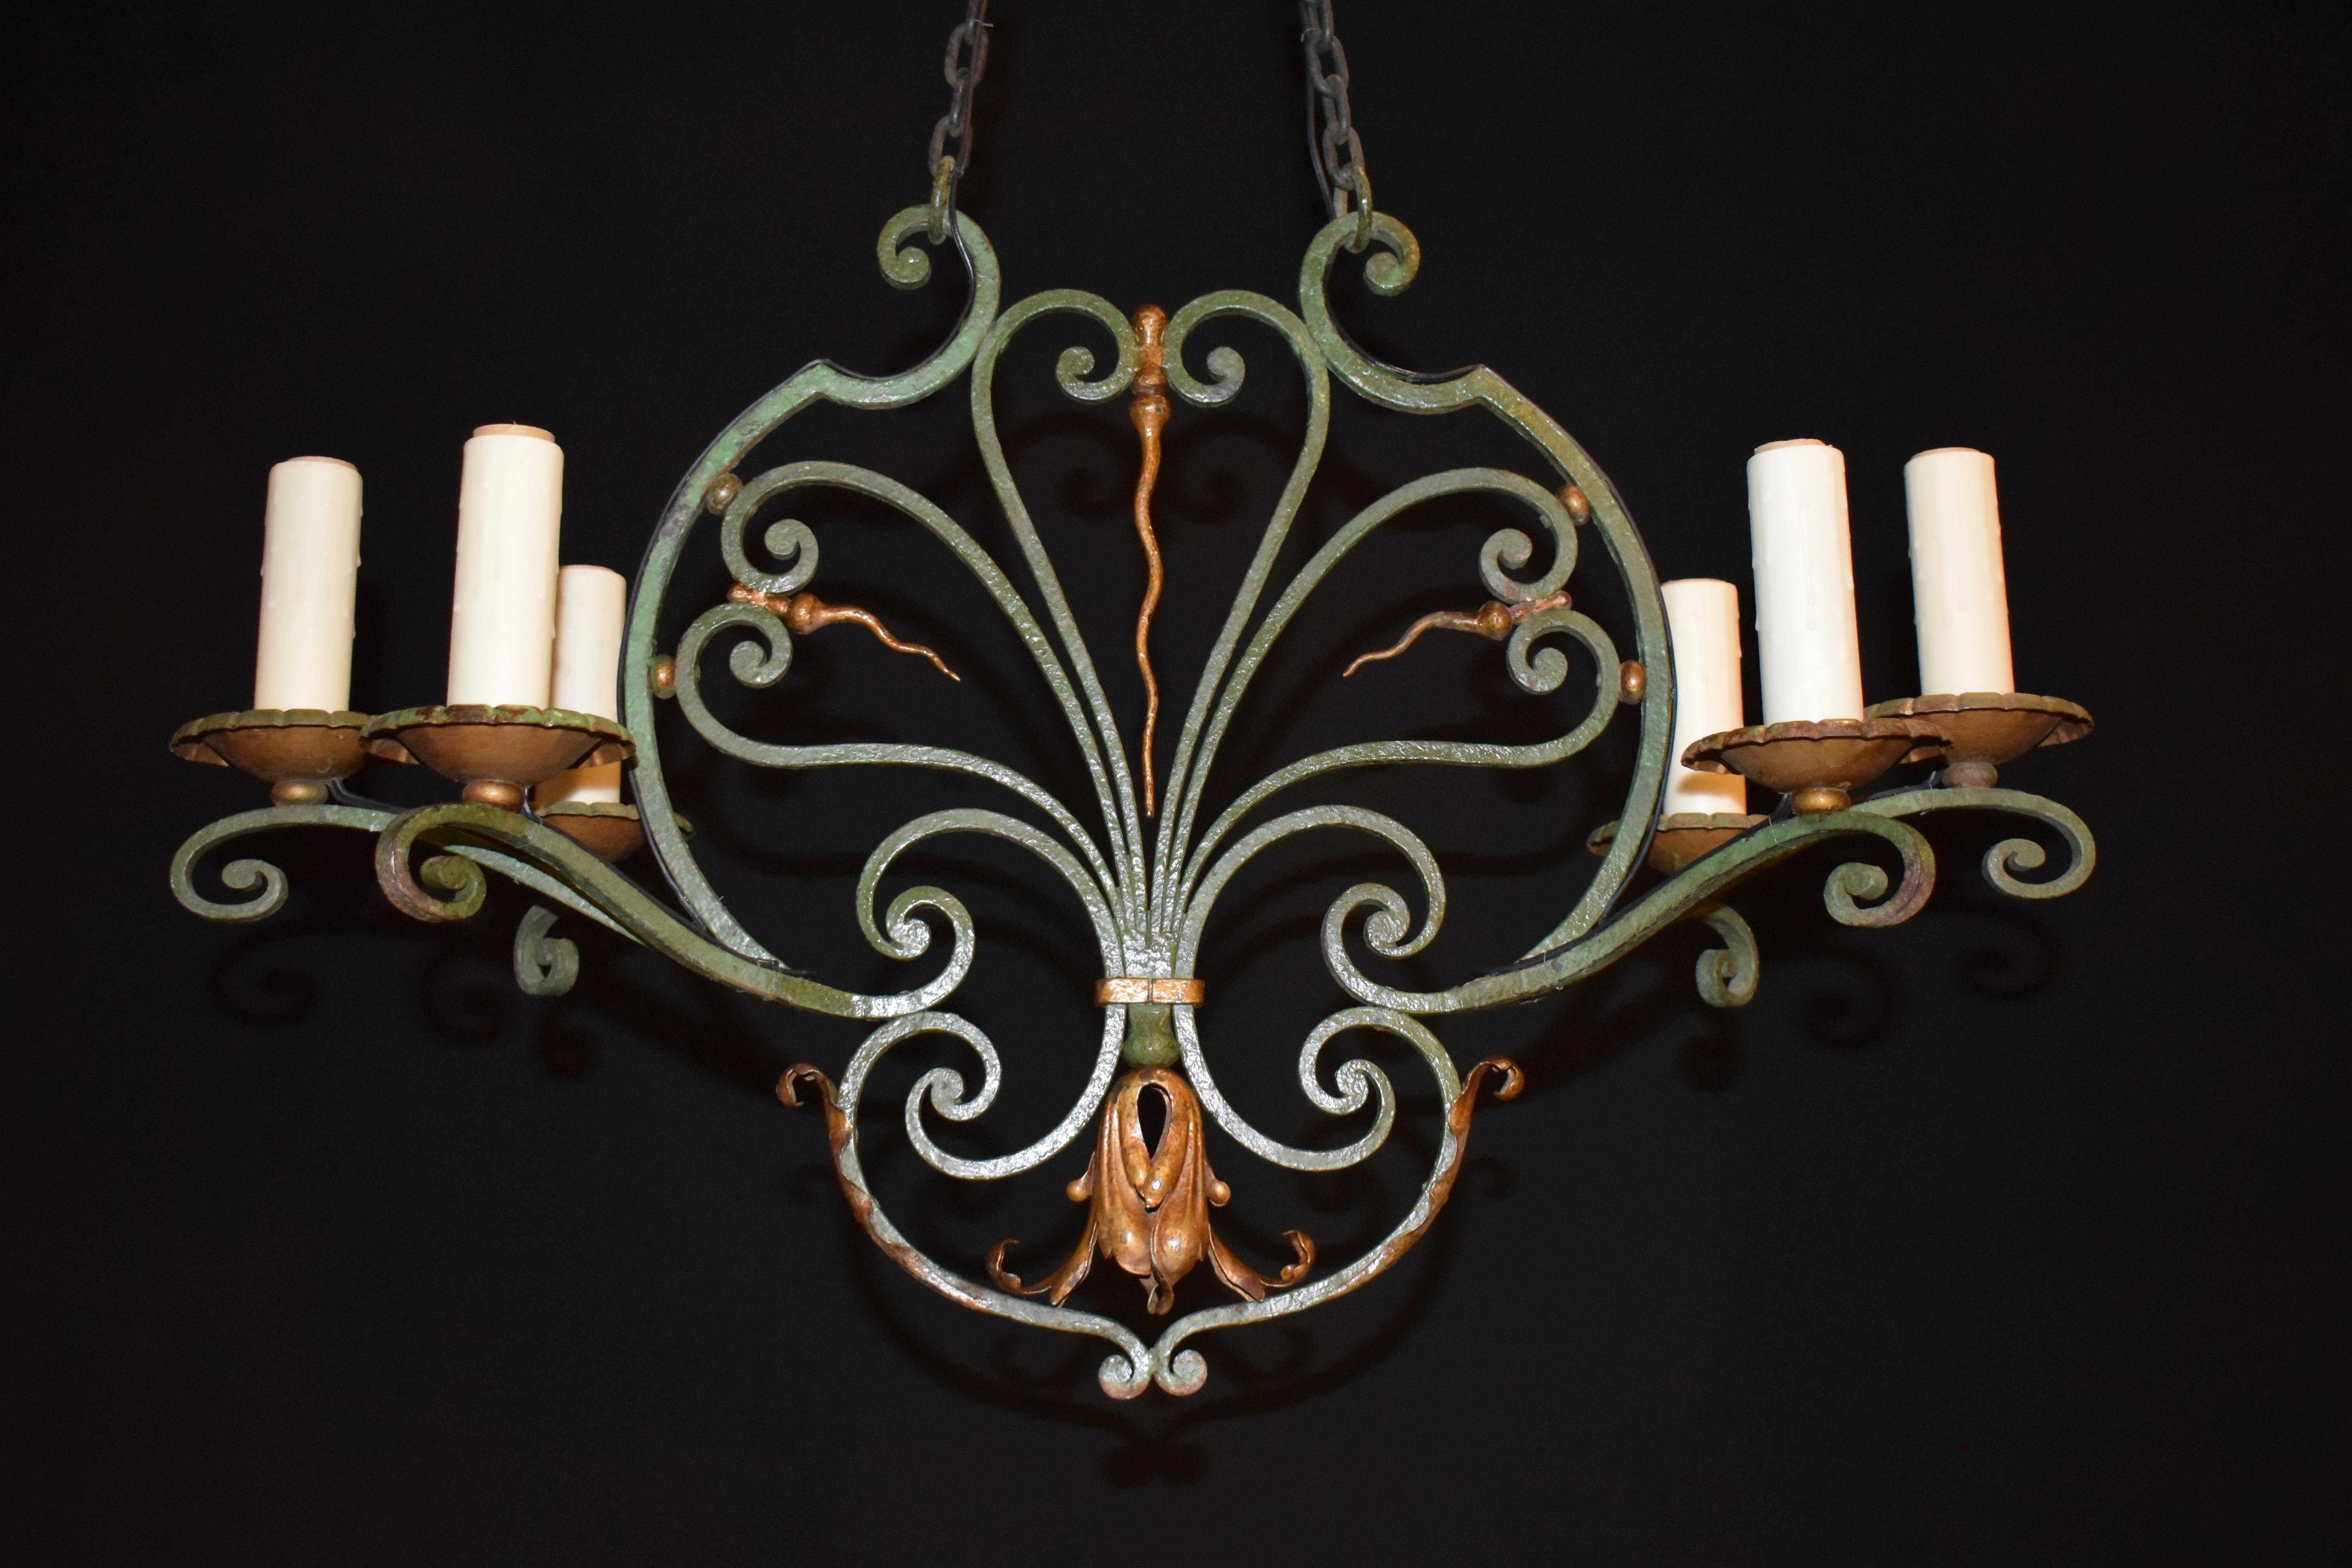 Iron chandelier. 6 lights
Dimensions: Height 35